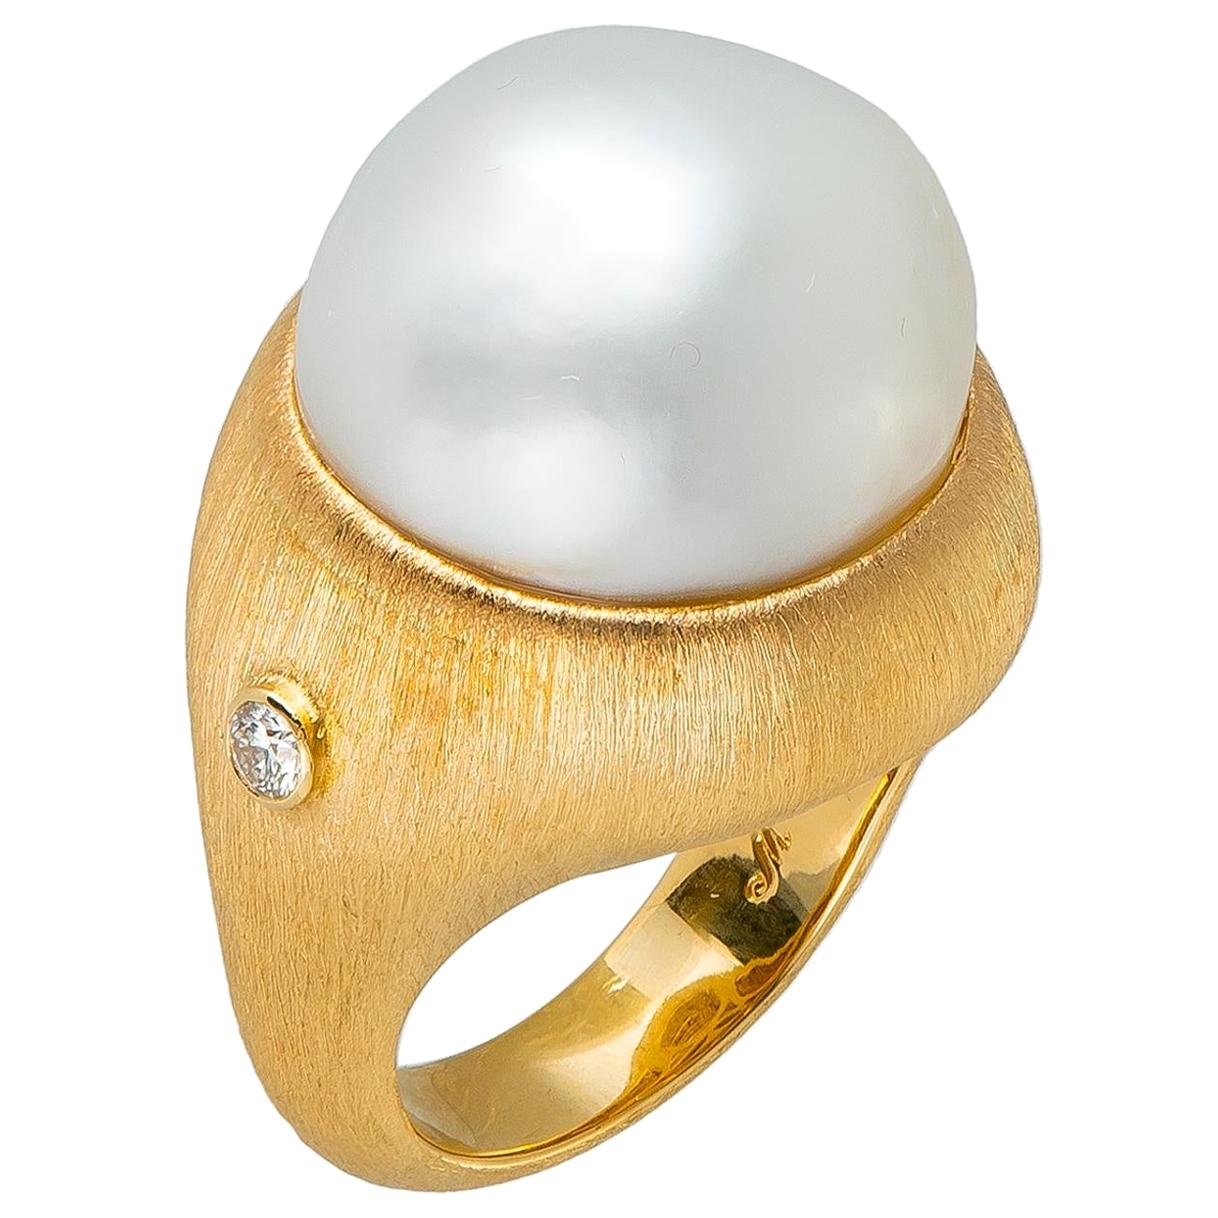 Margot McKinney 18K Brushed Finish Gold Ring with South Sea Pearl and Diamonds